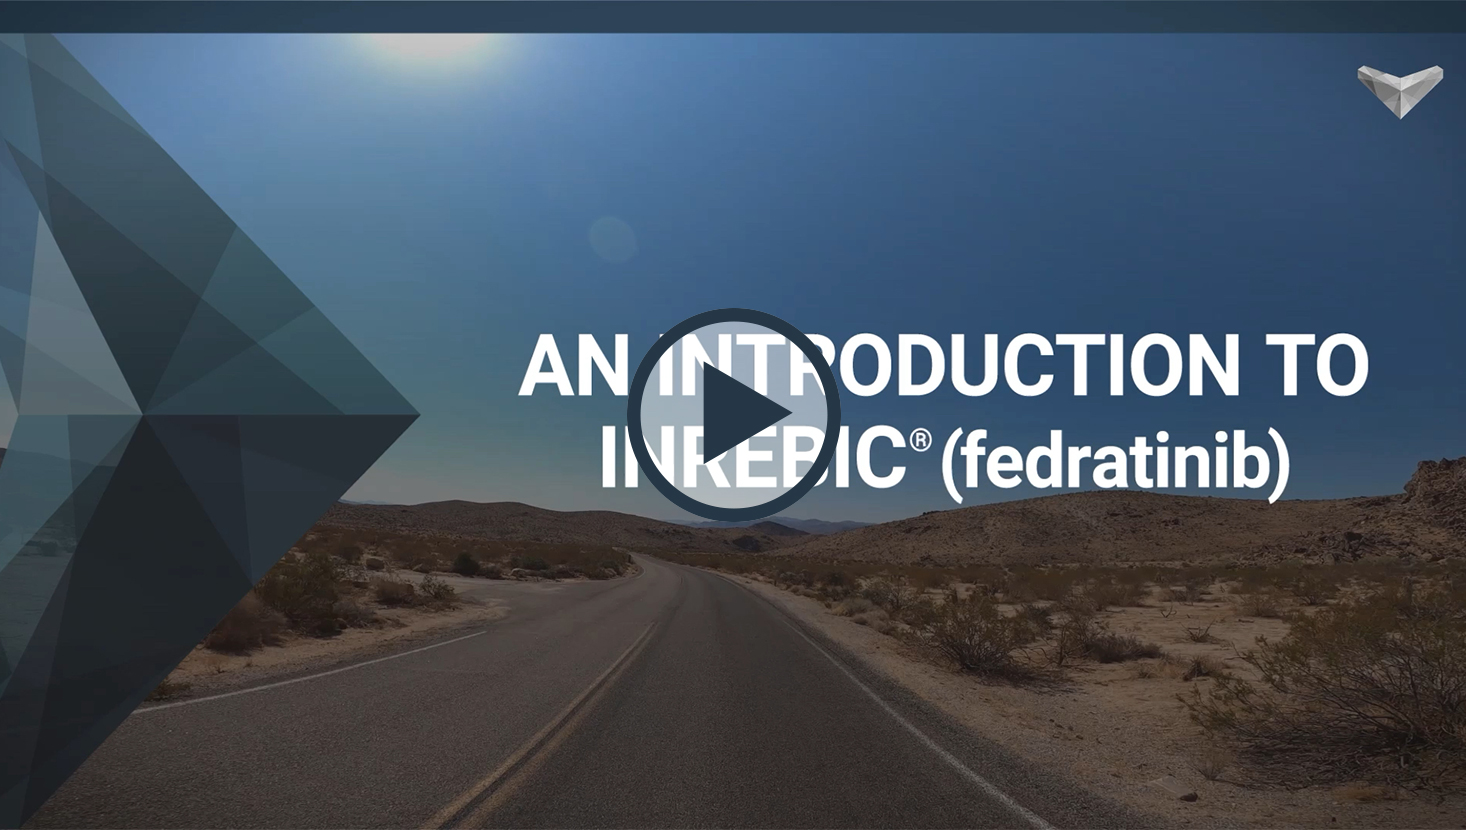 What is INREBIC? An introduction to INREBIC (fedratinib) video